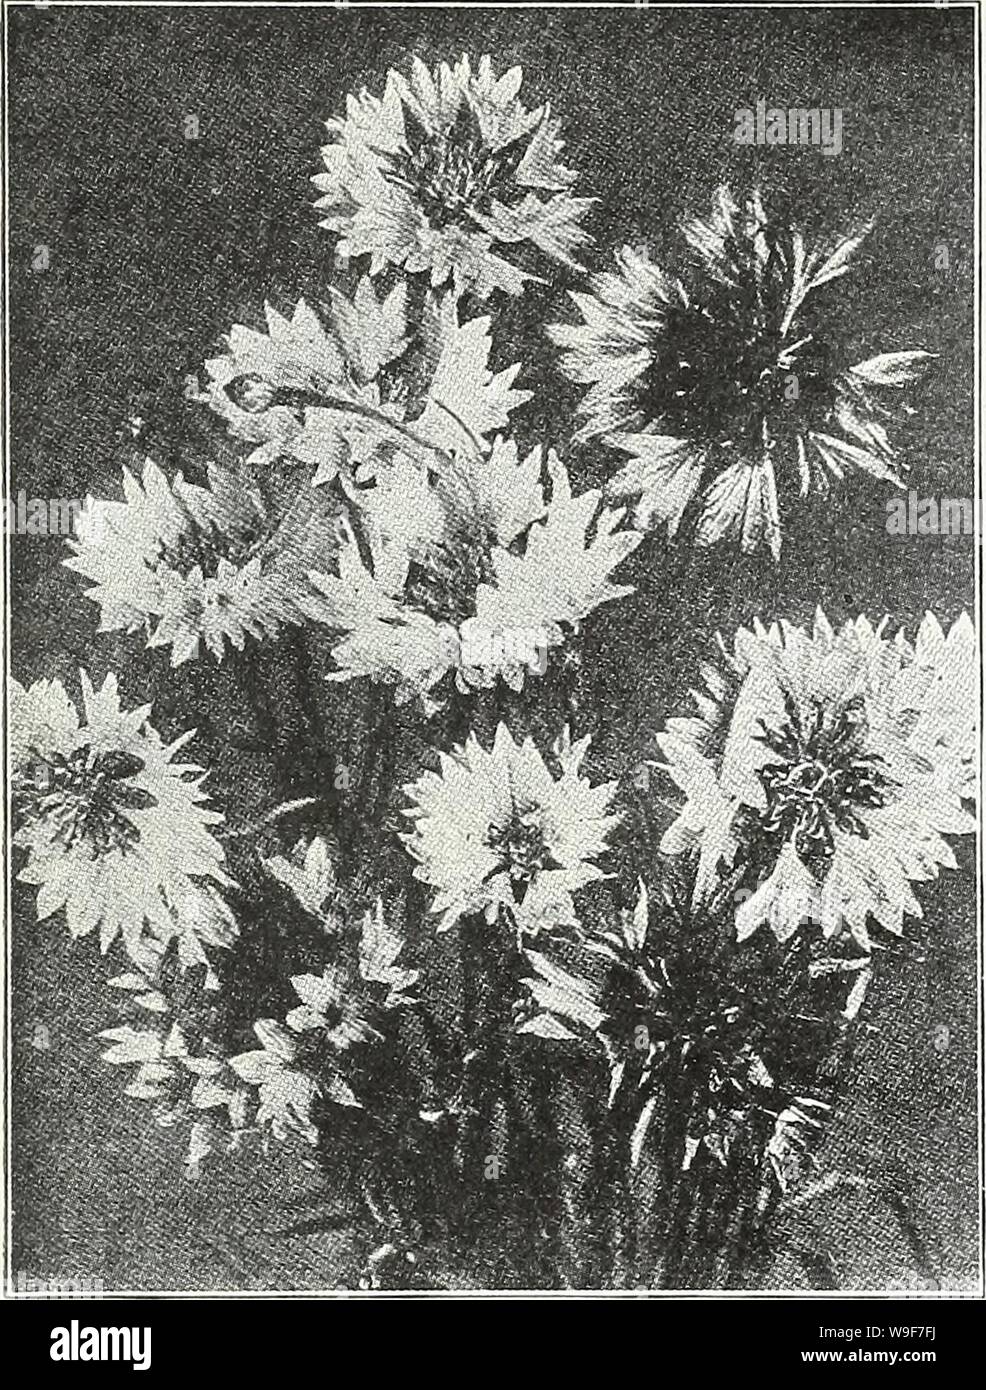 Archive image from page 20 of Currie's garden annual  spring,. Currie's garden annual : spring, 1935 60th year  curriesgardenann19curr 1 Year: 1935 ( CURRIE BROTHERS CO., MILWAUKEE, WIS. Page 17    ientaurea Cyanus CHERIANTHUS ALLIONI (Siberian Wallflower)—A fine variety of hardy Wallflower, used mostly as an annual having bright orange-colored flowers with dark green foli- age; a splendid rock plant. Seeds, Pkt., 10c. LINIFOLIUS (Alpine Wallflower)—Forms compact plants about 9 inches high with numerous small spikes of bright mauve flowers, makes a very neat line. 50c per V4, oz.; 15c pkt. CLA Stock Photo